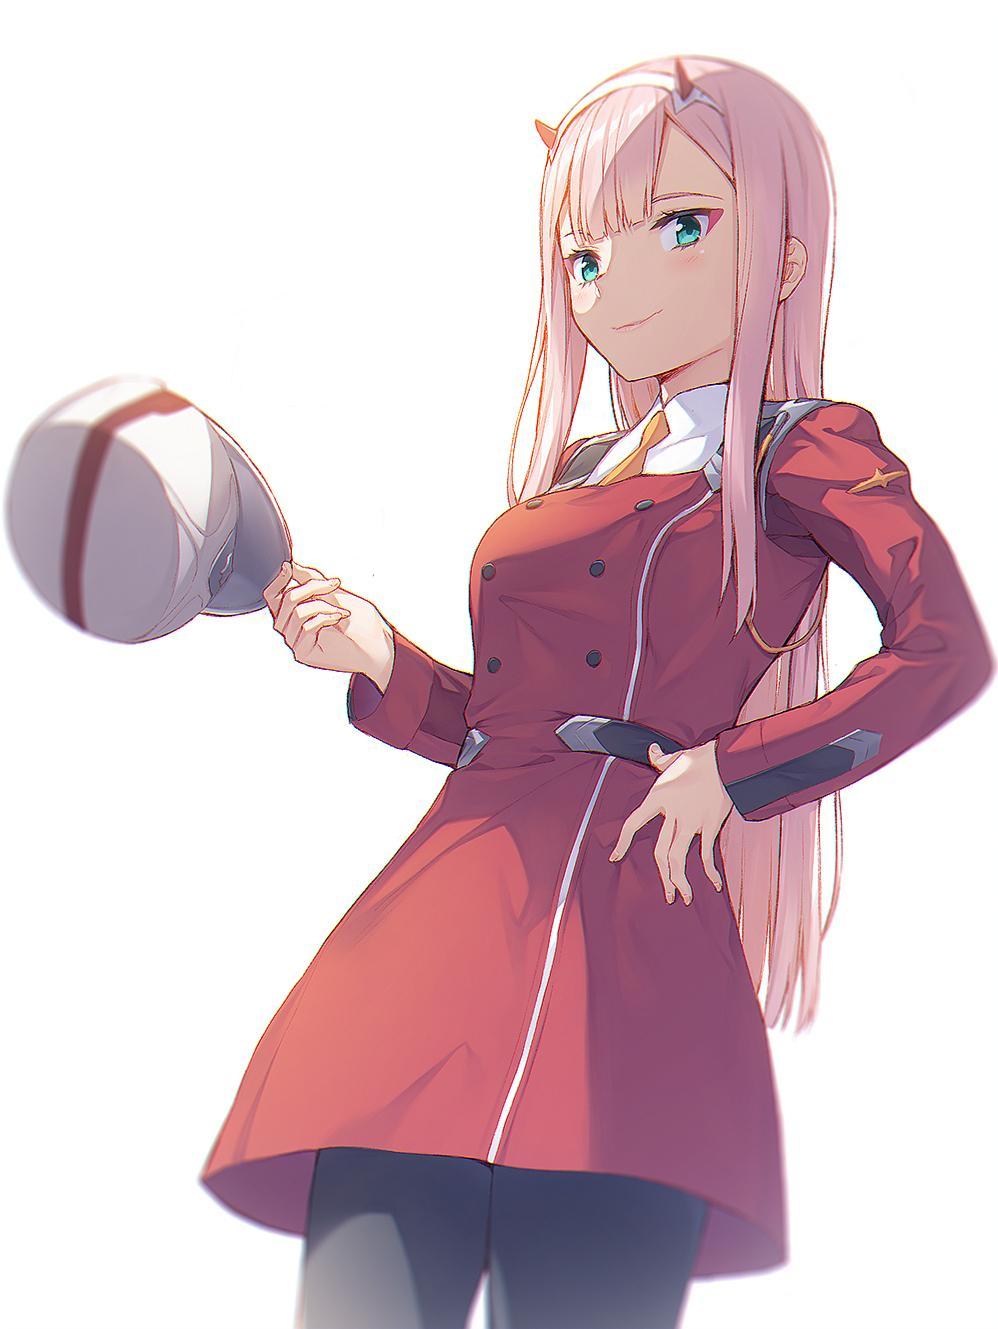 Zero Two Wallpaper HD for Android - APK Download